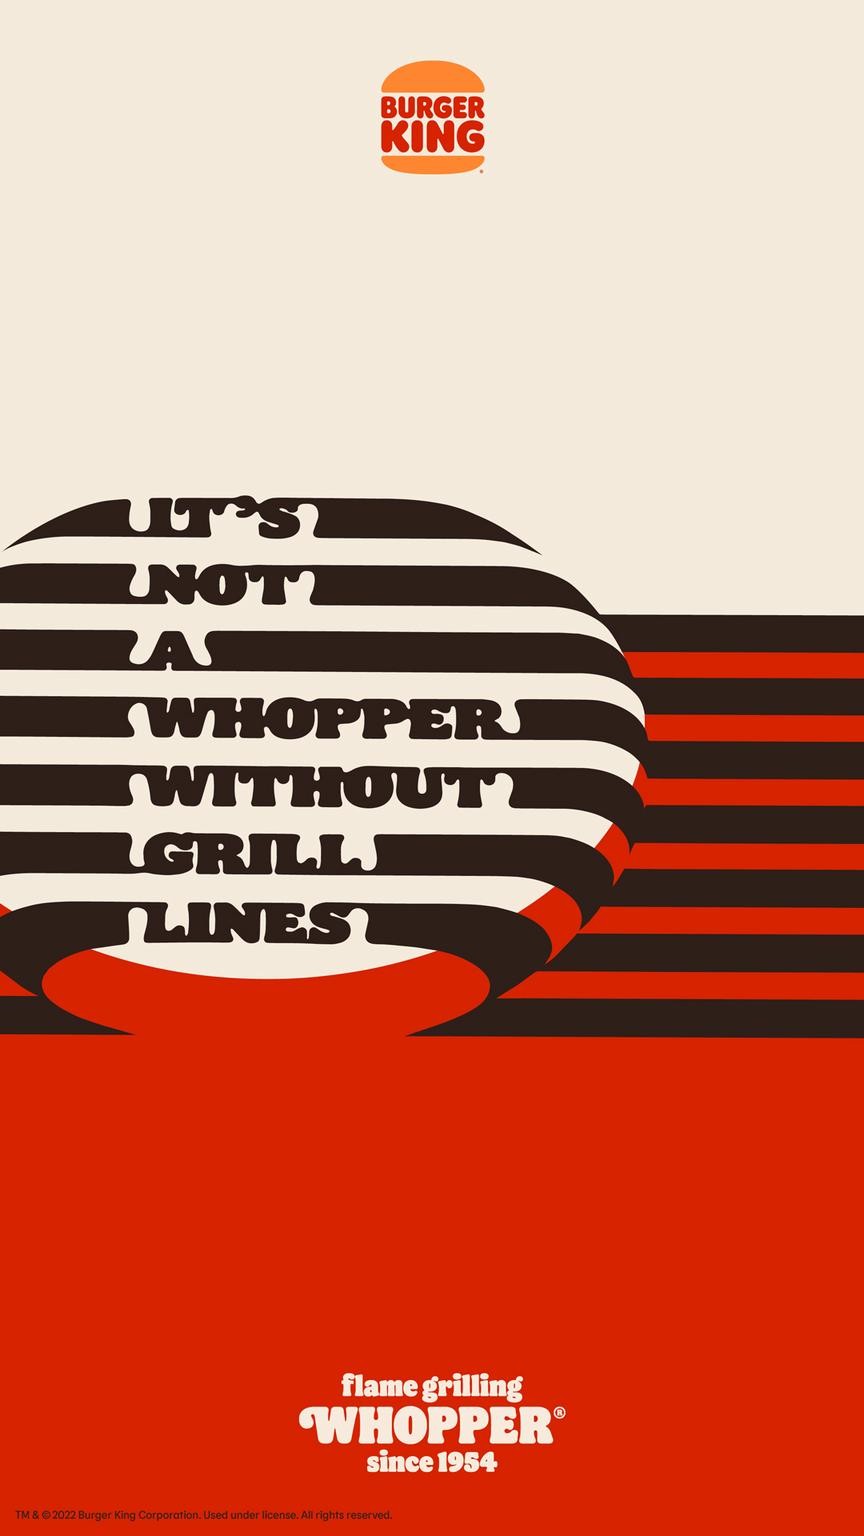 Grill Lines